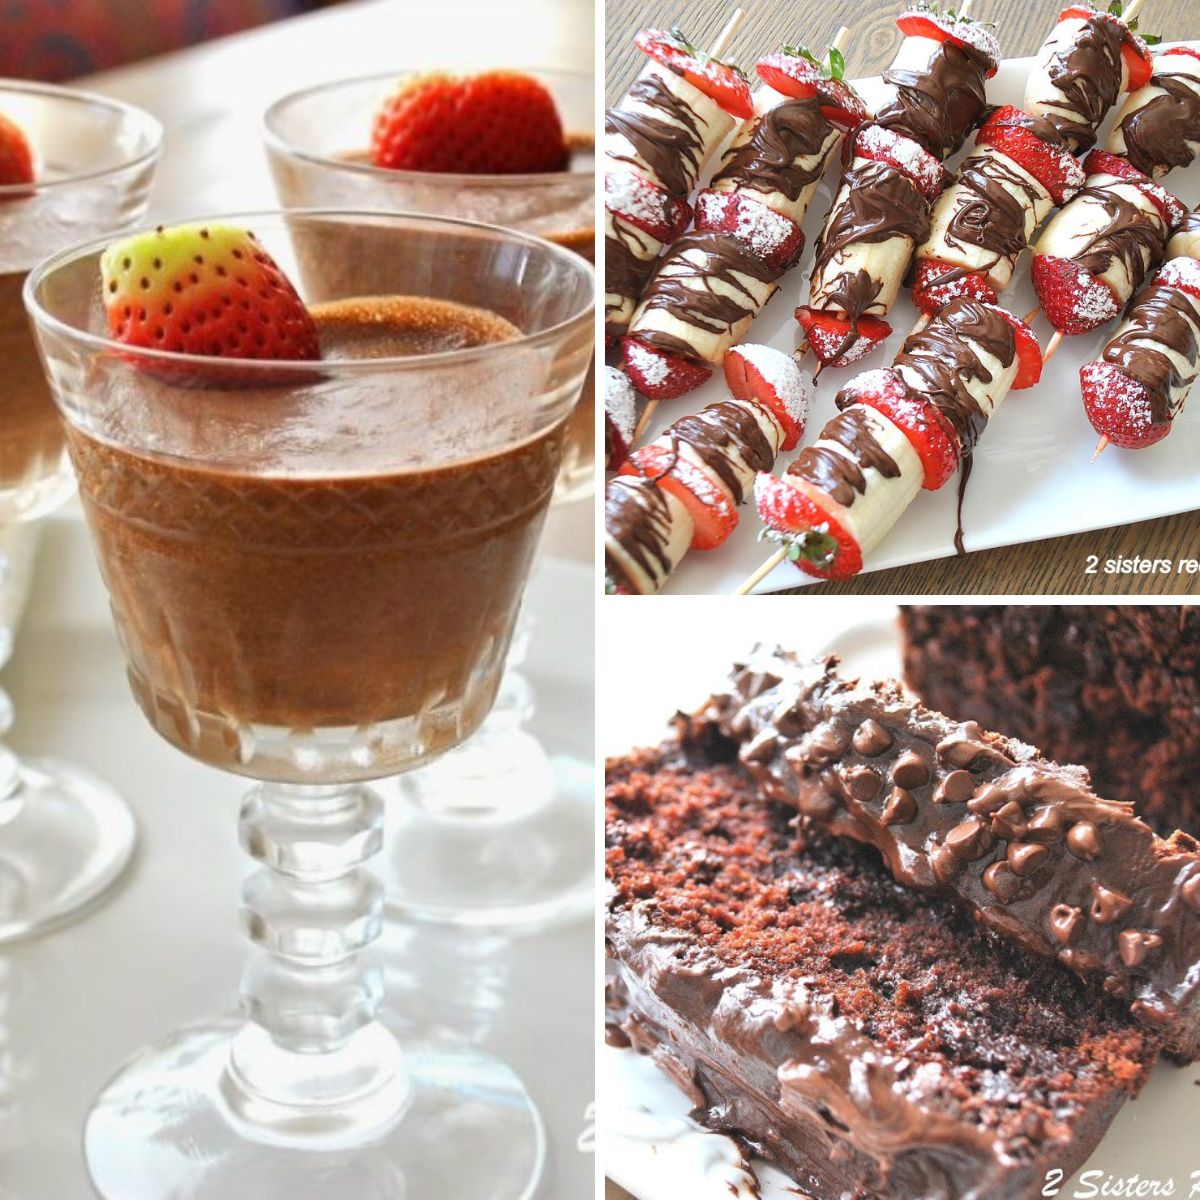 a stem glass with chocolate mousse and strawberry on top, chocolate bread with chocolate frosting and strawberry and banana skewers with chocolate drizzled over them.